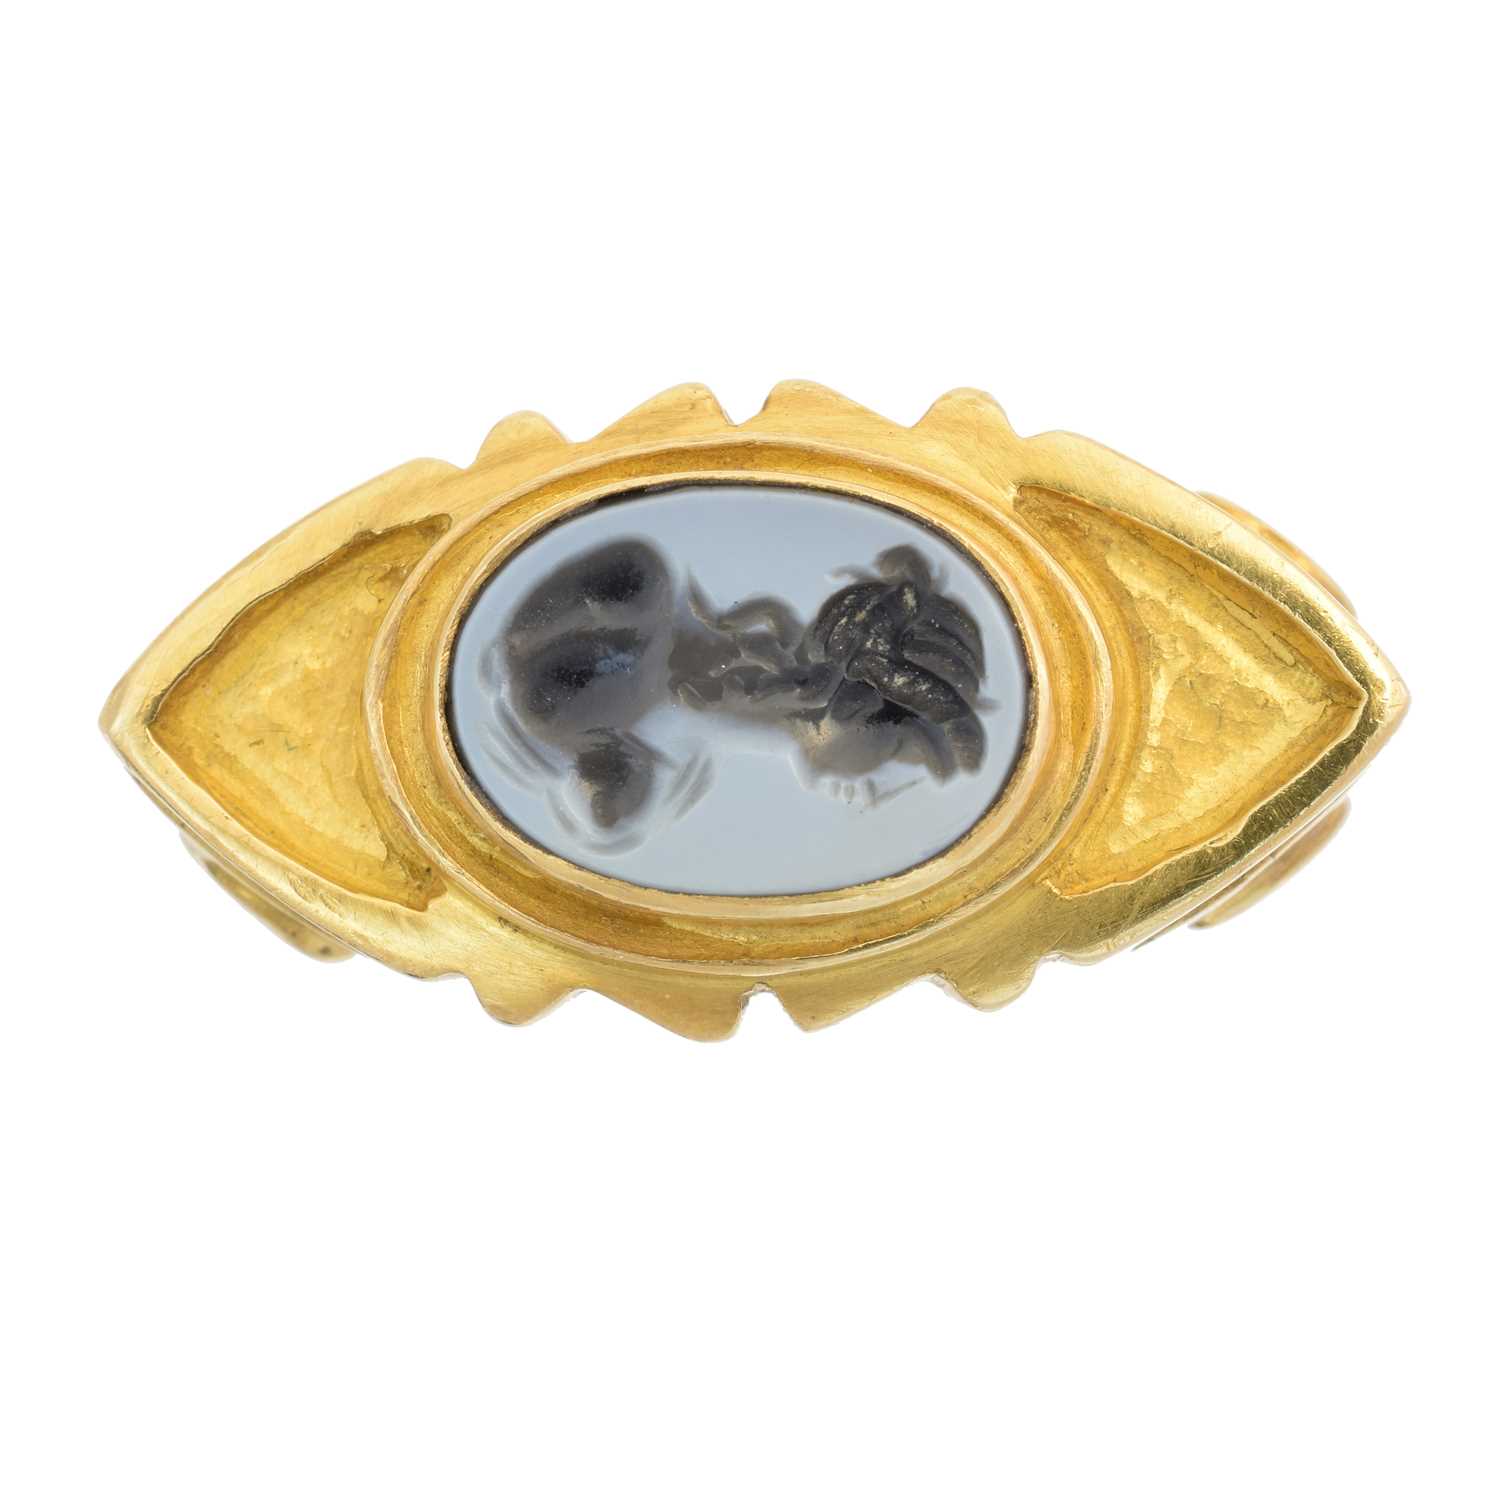 Lot 238 - A hardstone cameo ring